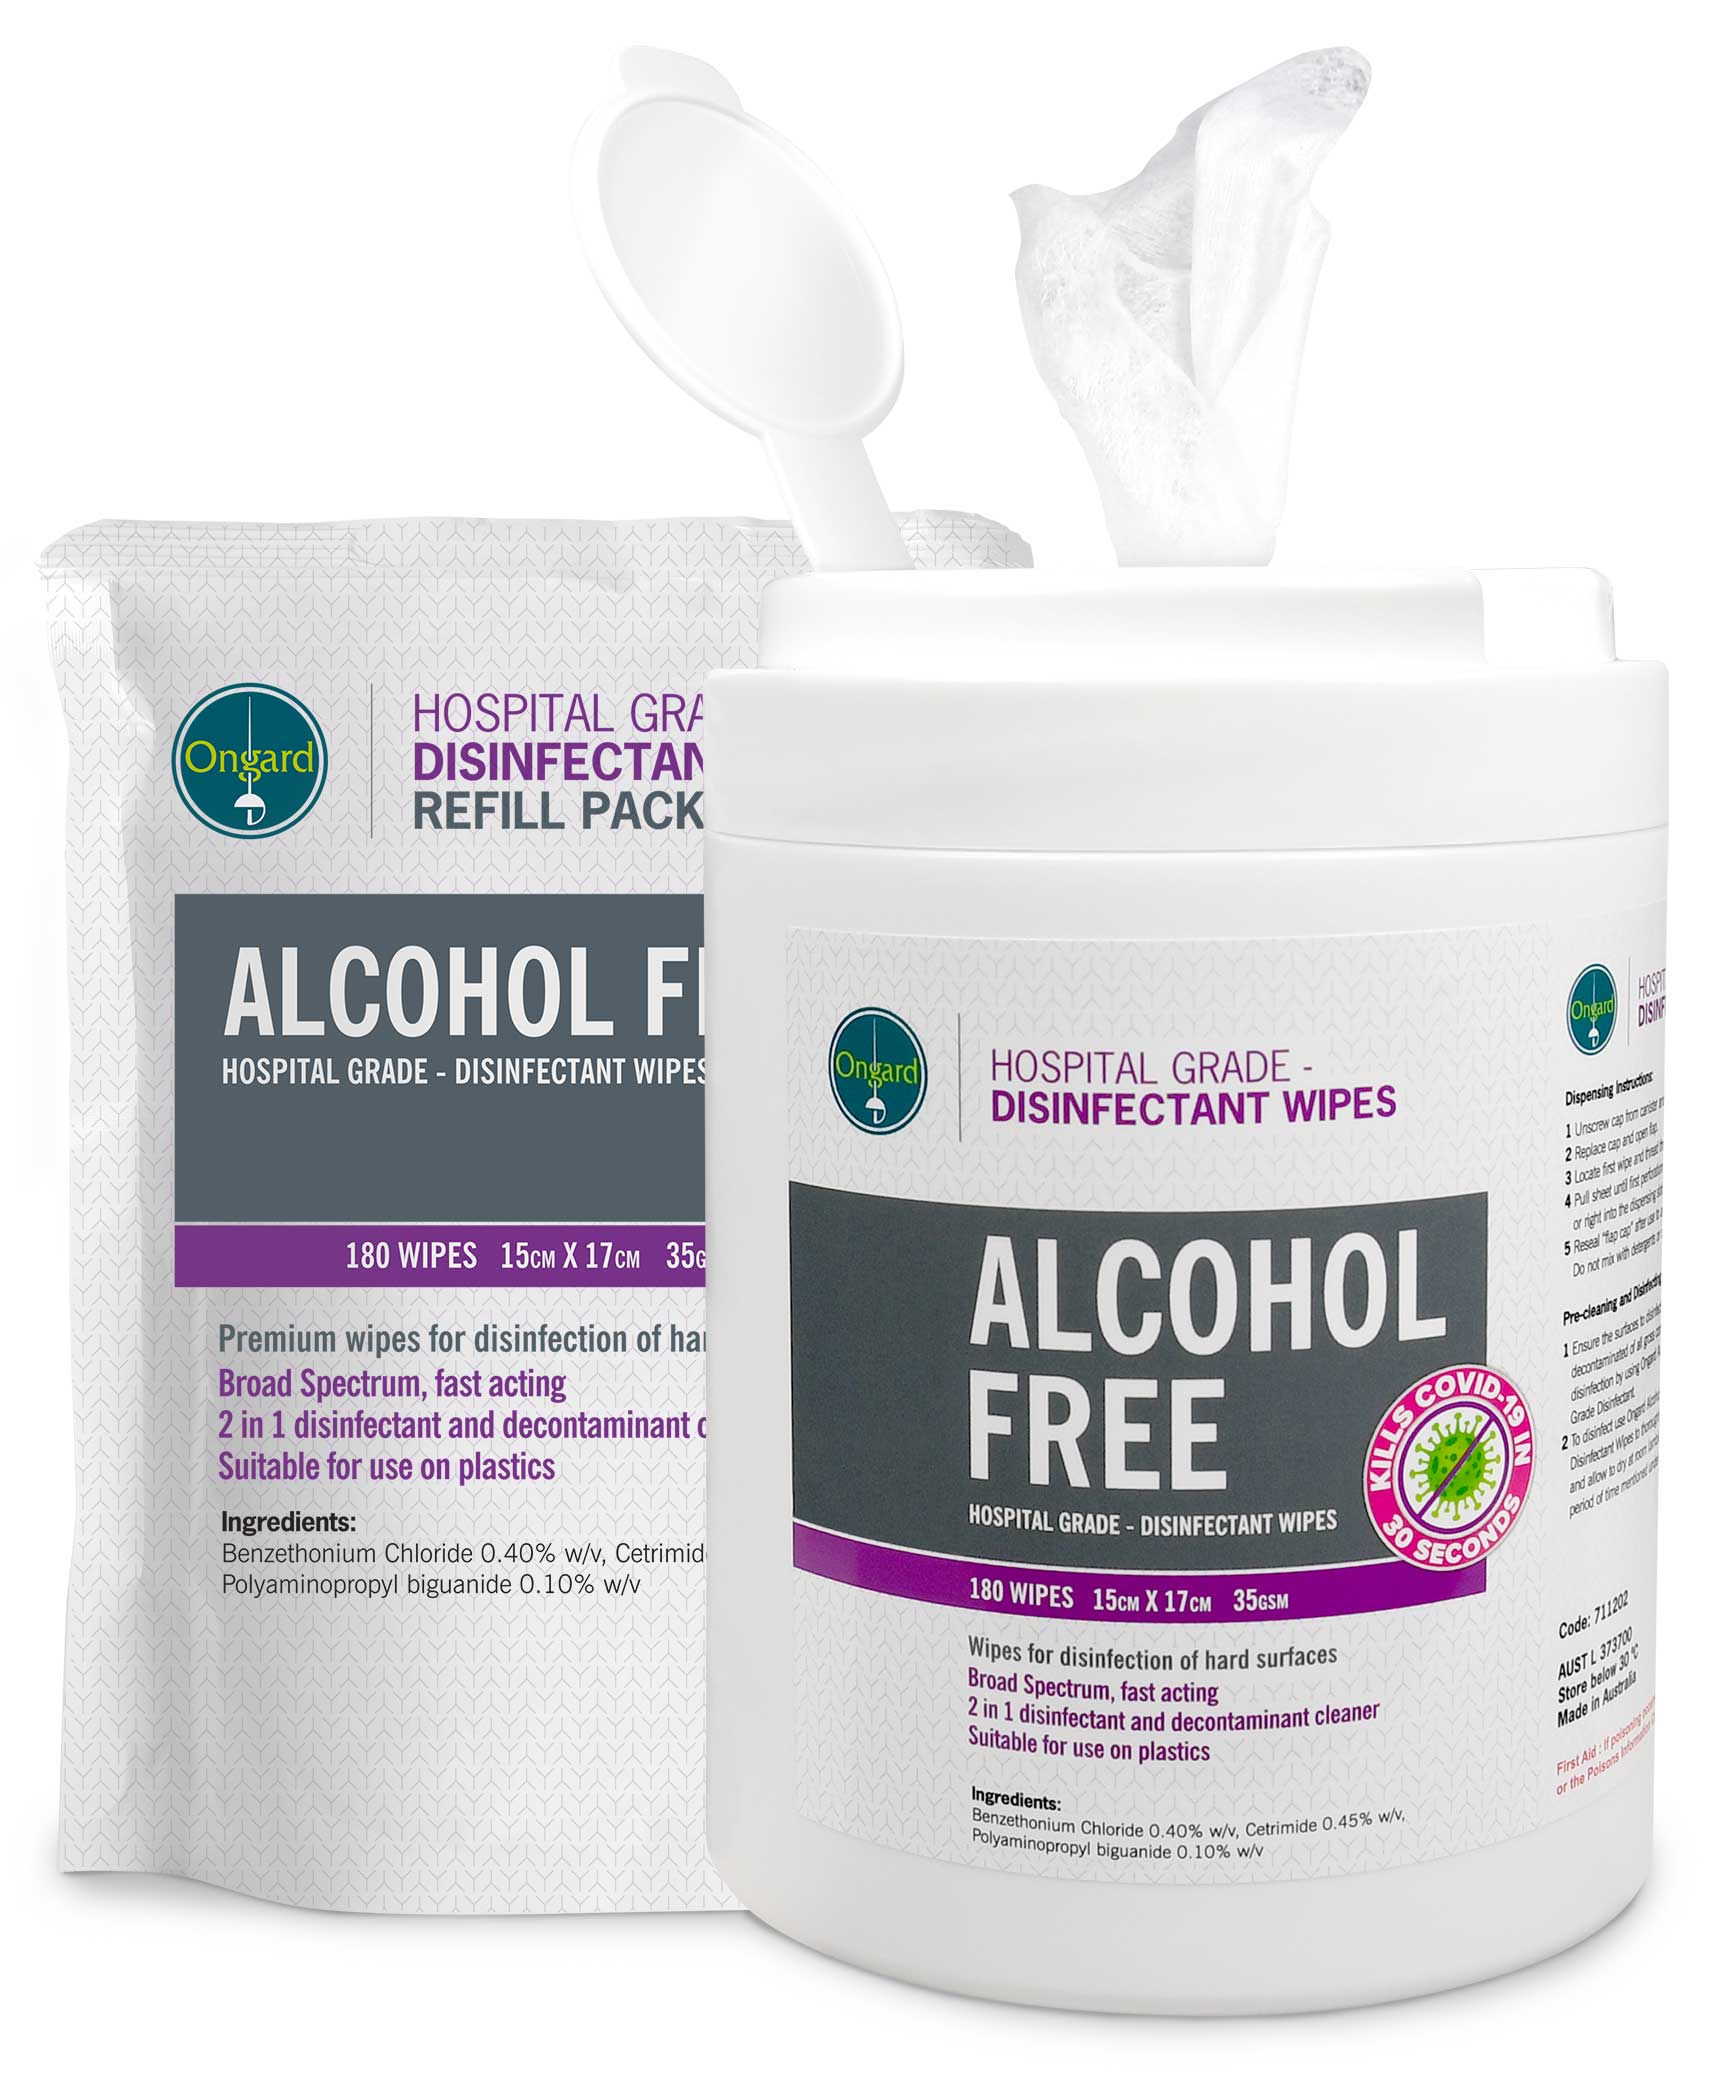 Ongard Hospital Grade Disinfectant Wipes Alcohol Free